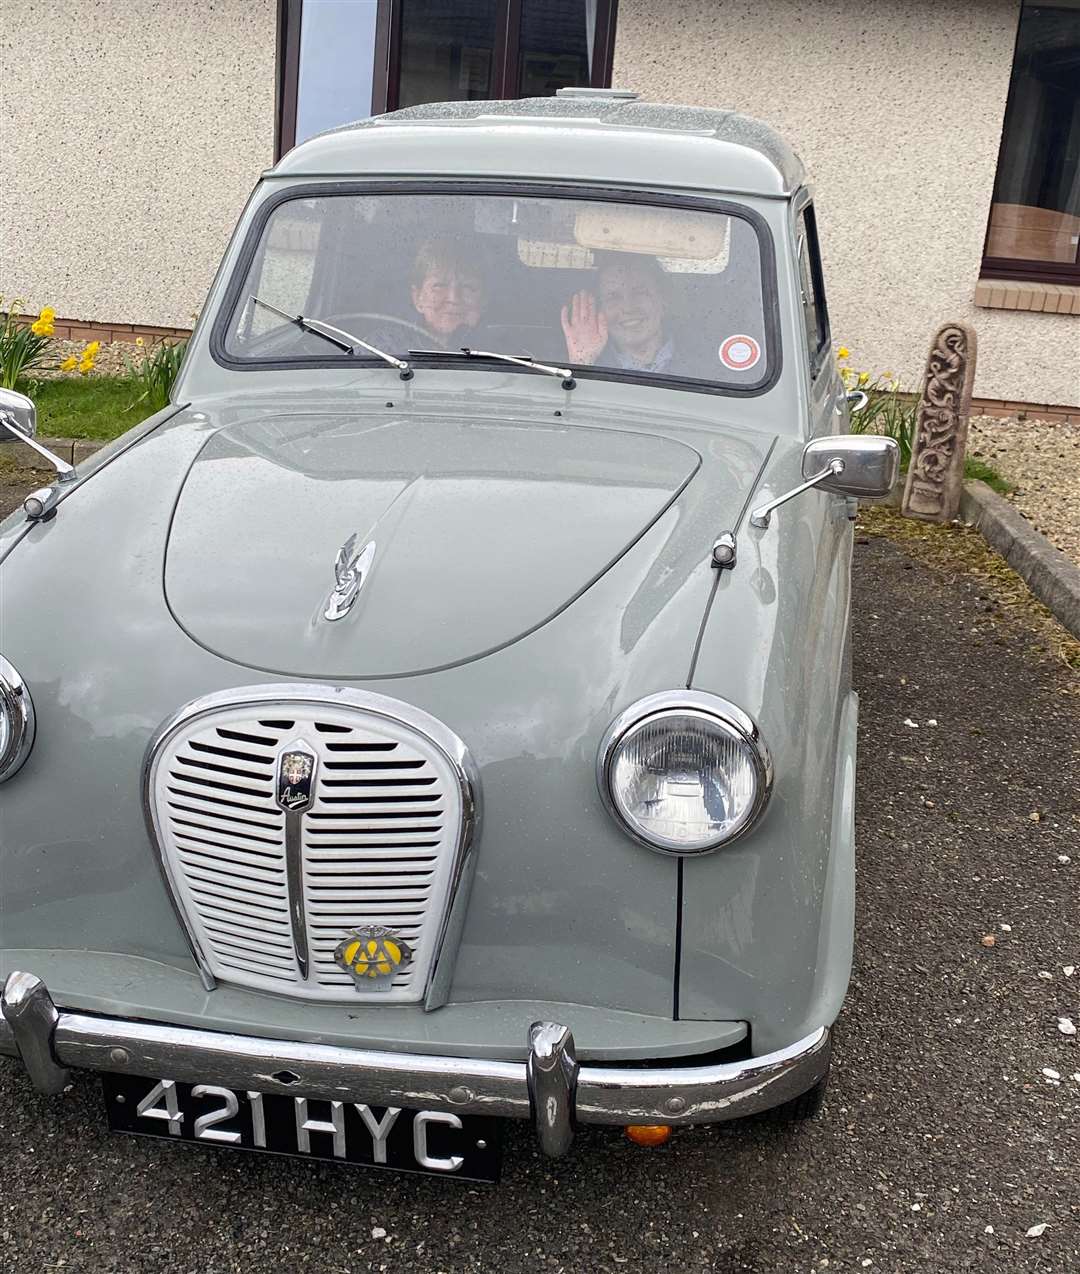 Nurse Wilma Henderson and care practitioner Zoe Rothera in one of the classic cars.